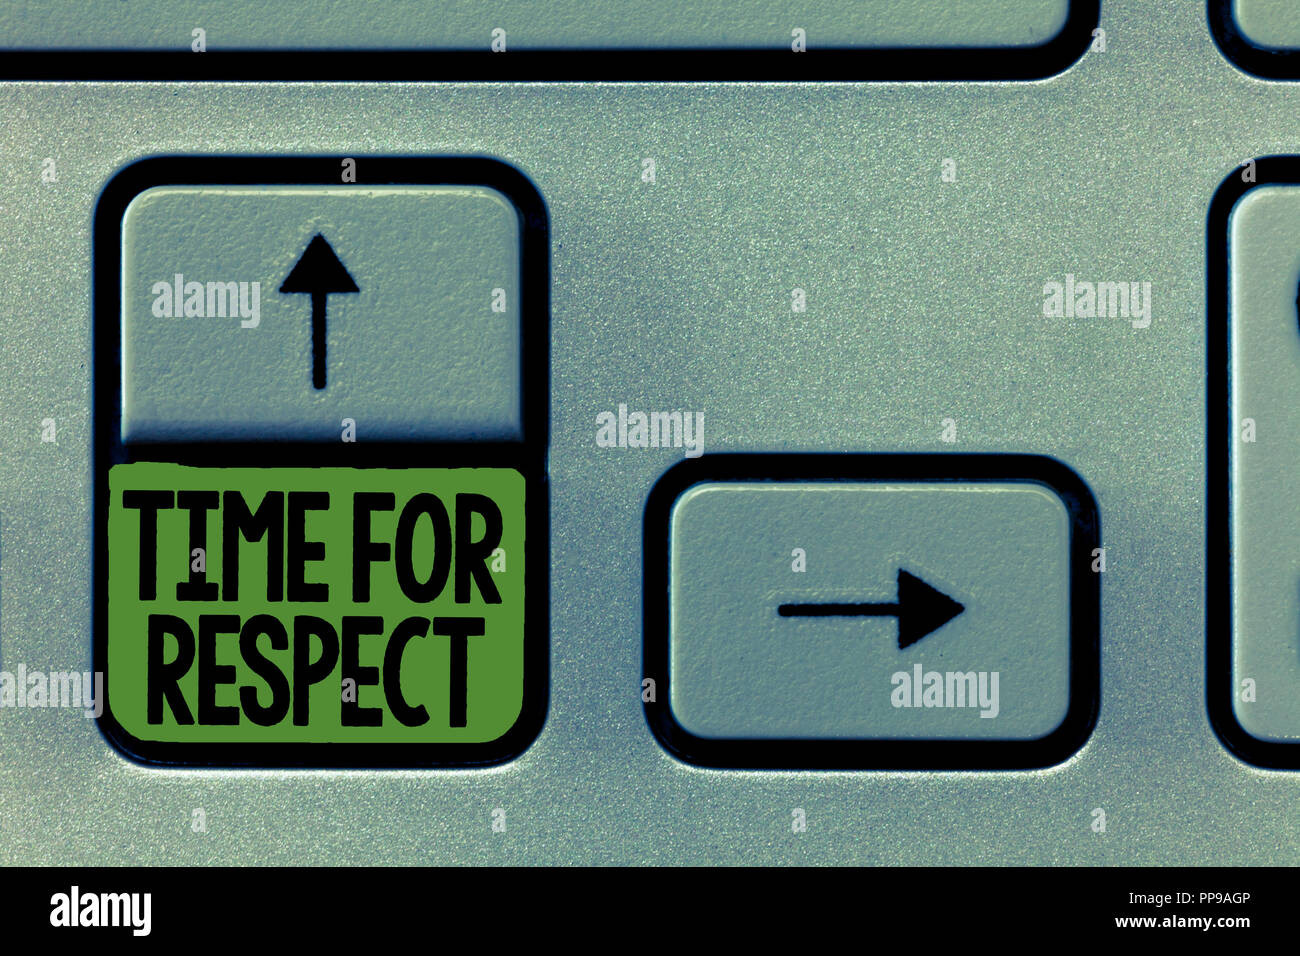 respect meaning